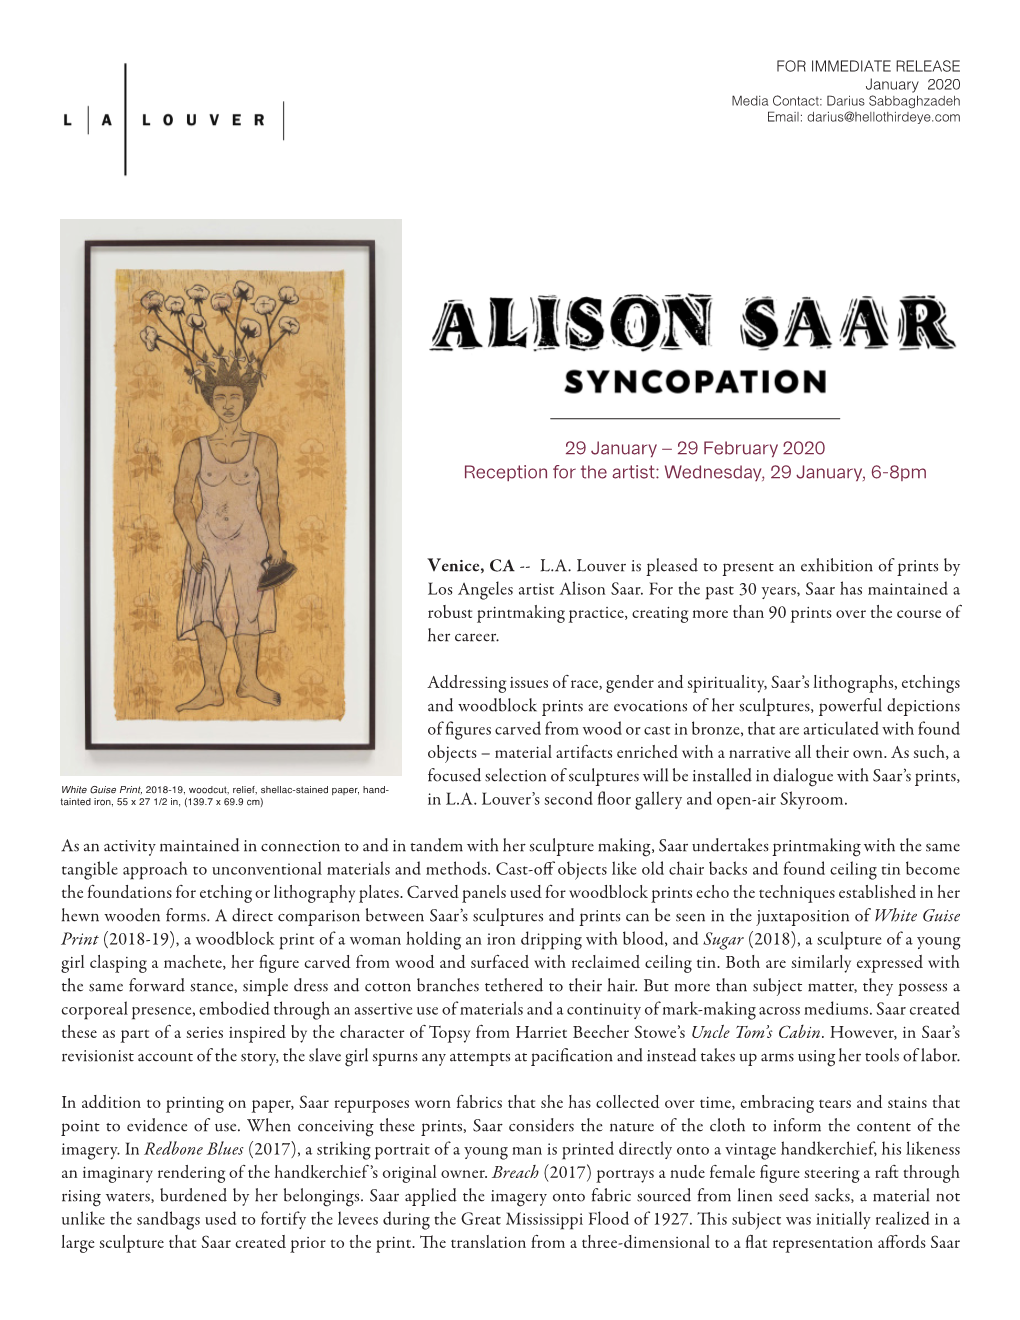 Venice, CA -- L.A. Louver Is Pleased to Present an Exhibition of Prints by Los Angeles Artist Alison Saar